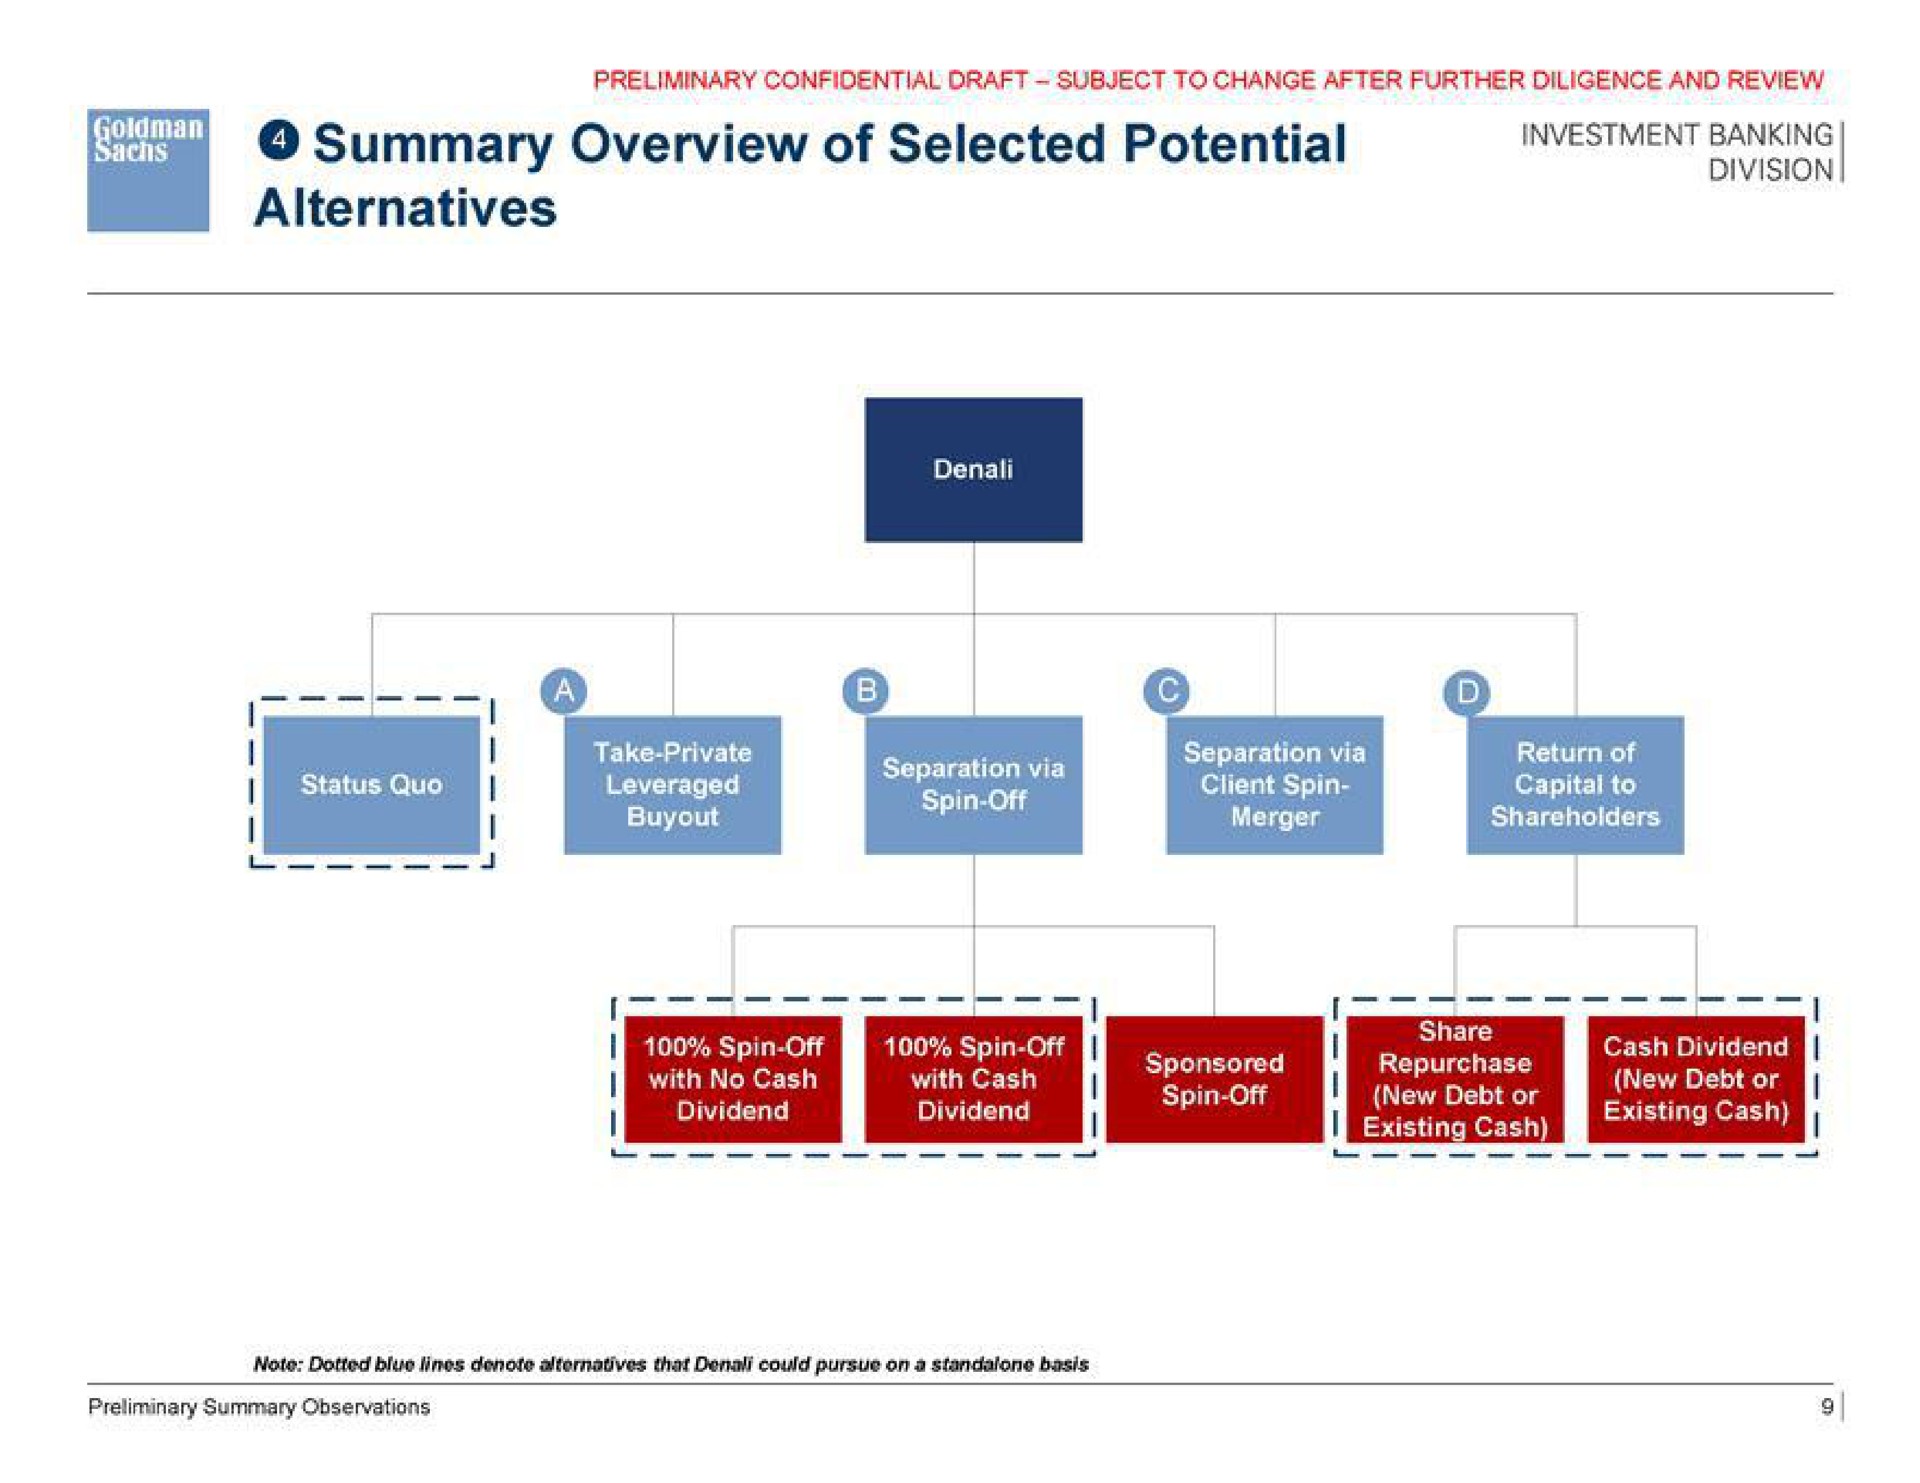 a summary overview of selected potential alternatives investment banking | Goldman Sachs